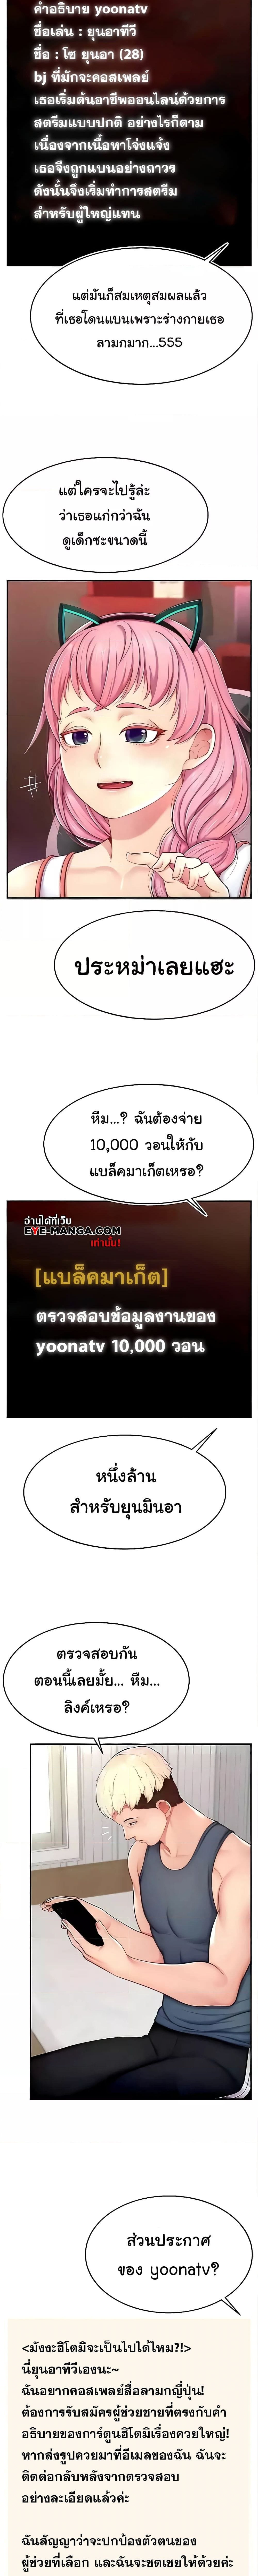 Making Friends With Streamers by Hacking! ตอนที่ 14 ภาพ 5